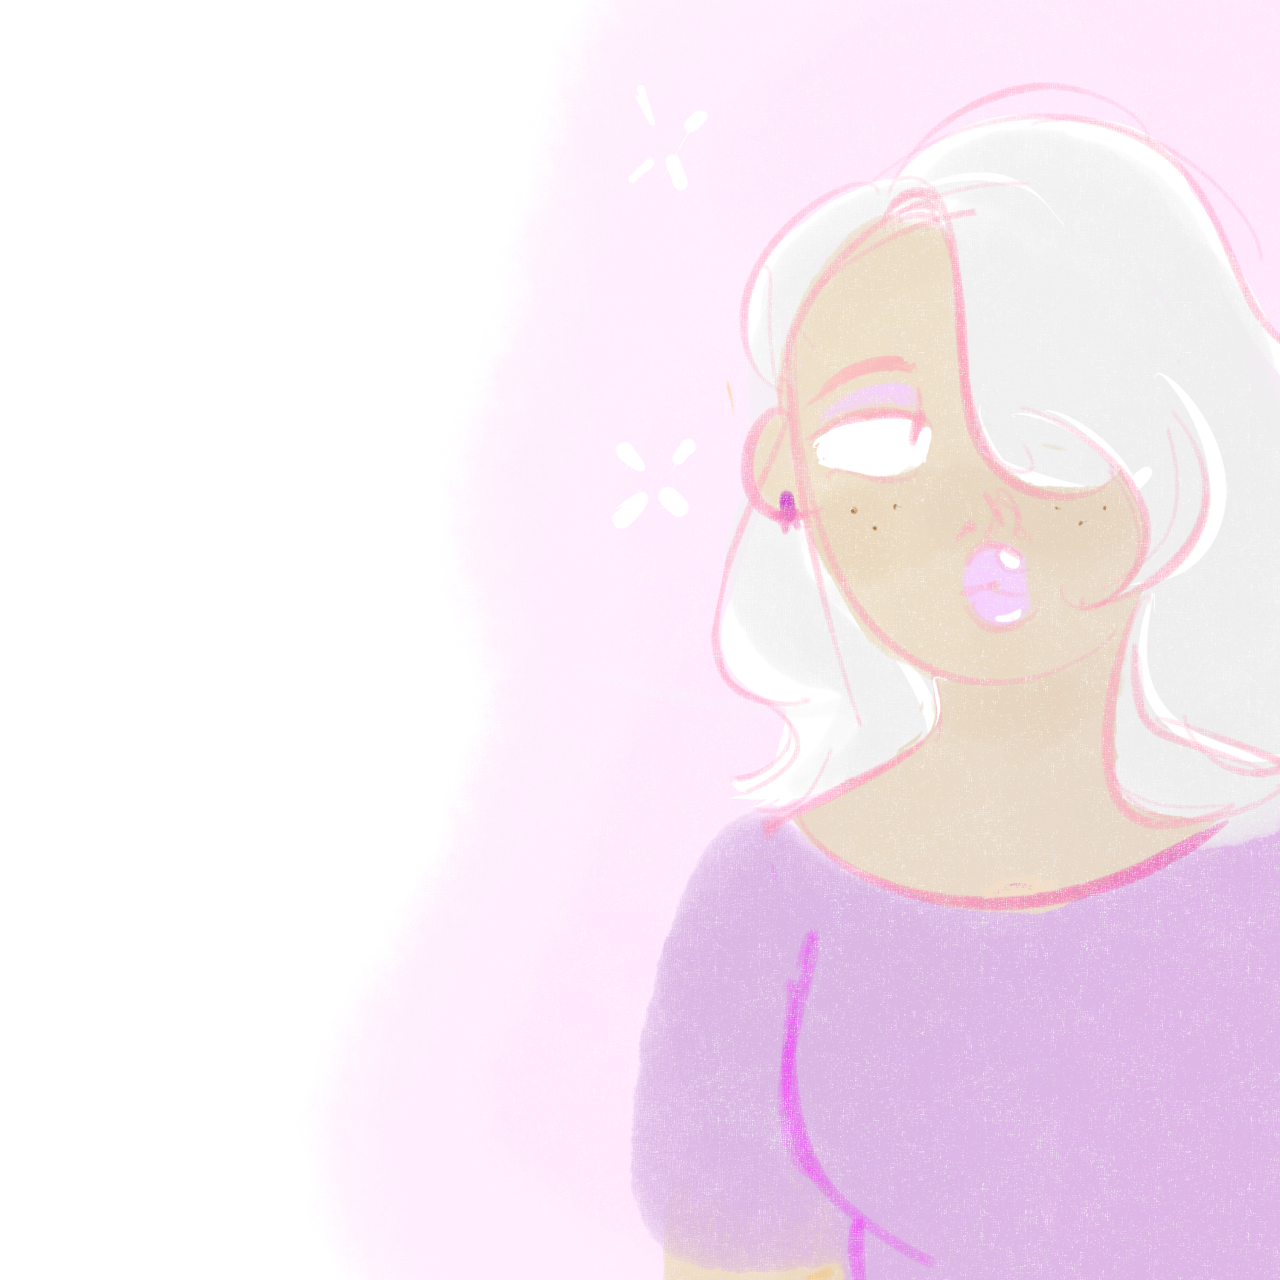 I want to draw something with human!Gem AU
But now only a wry sketch of Amethyst :с